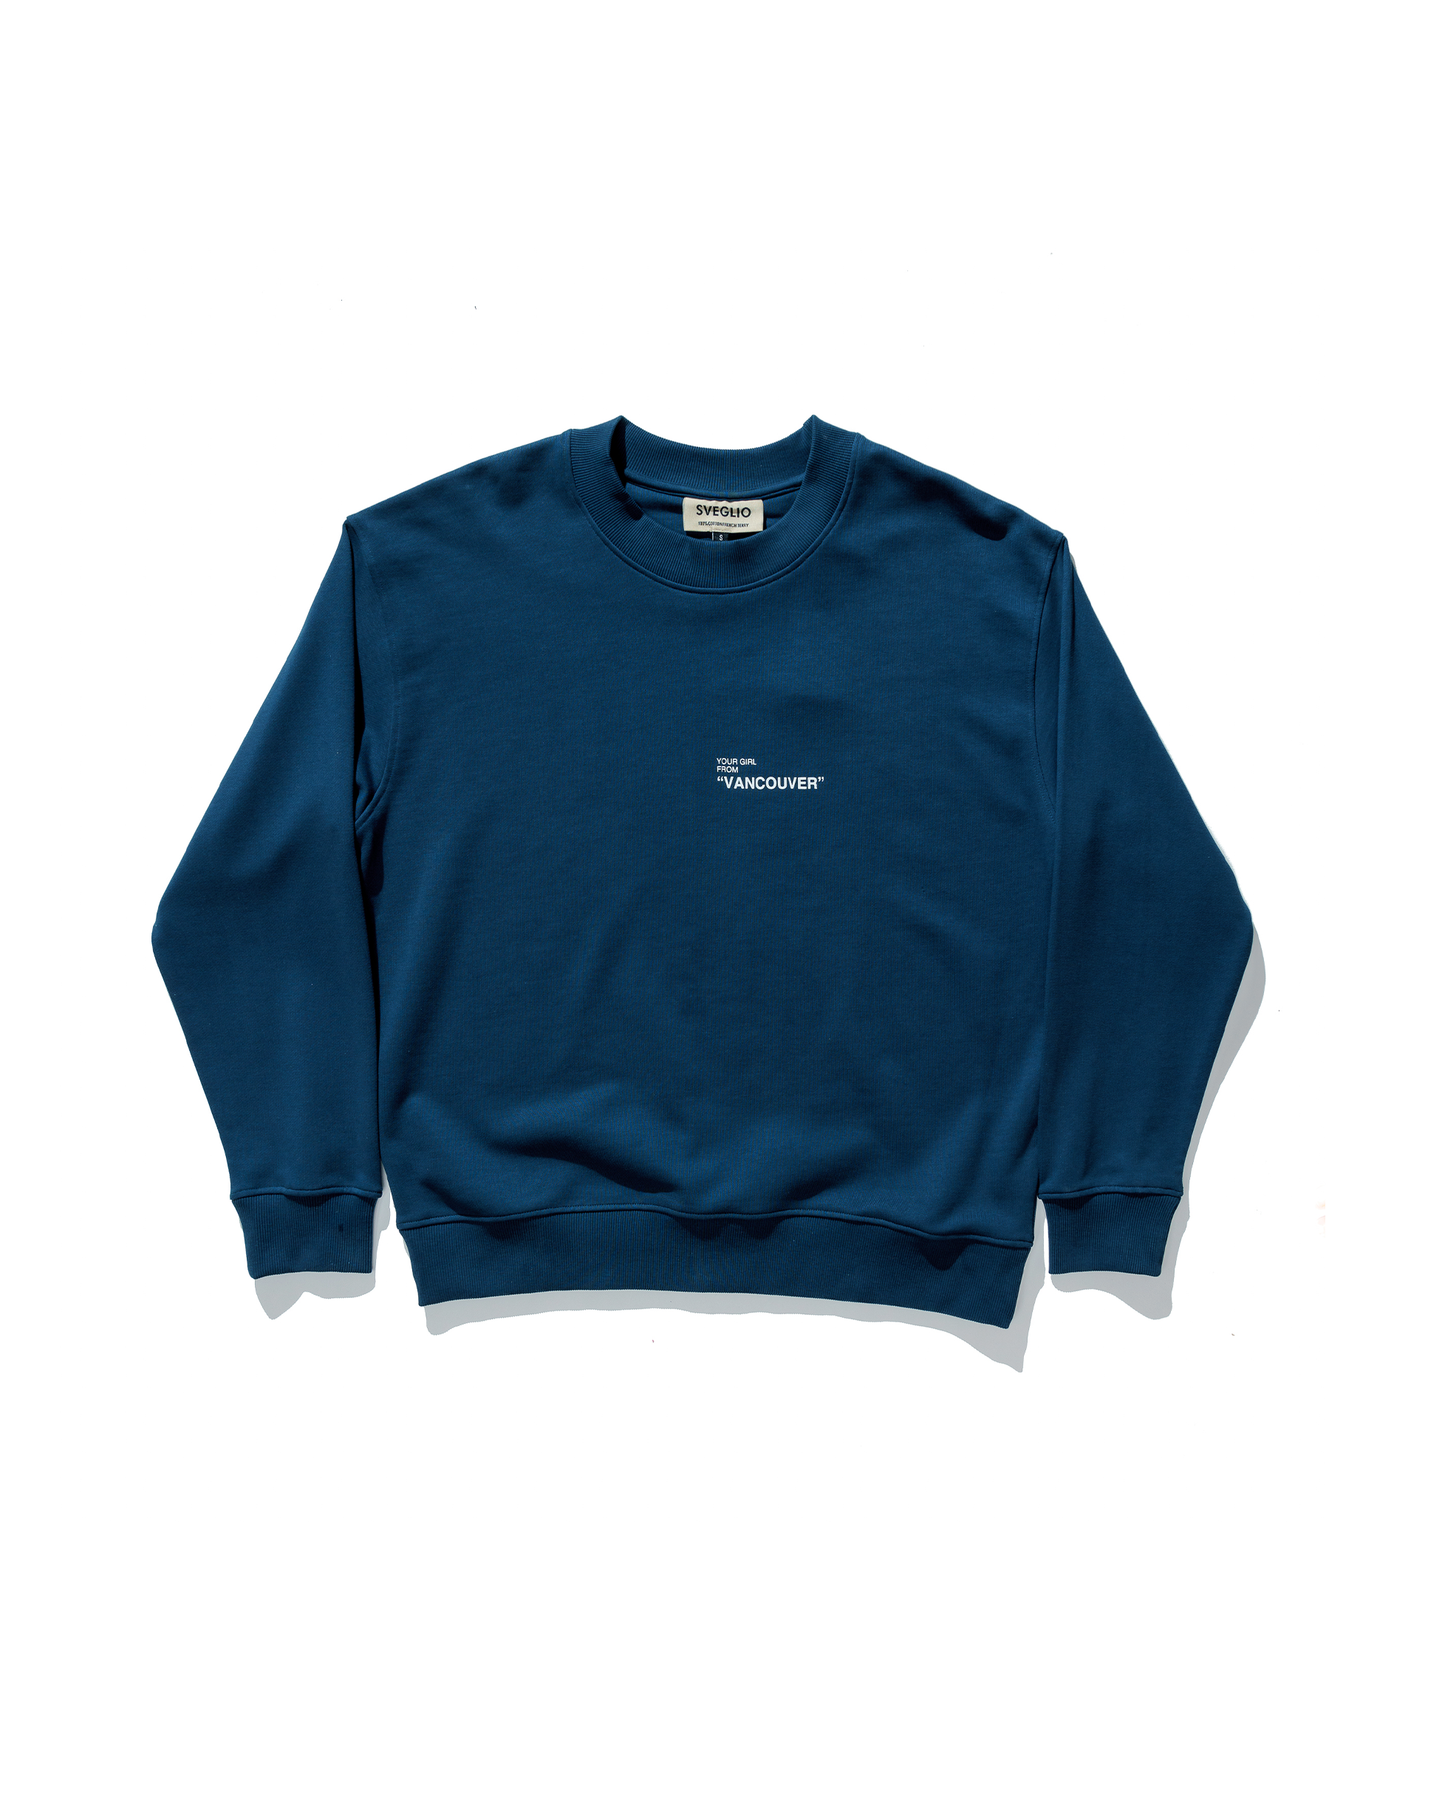 Your Girl from Vancouver Sweatshirt - Evening Blue